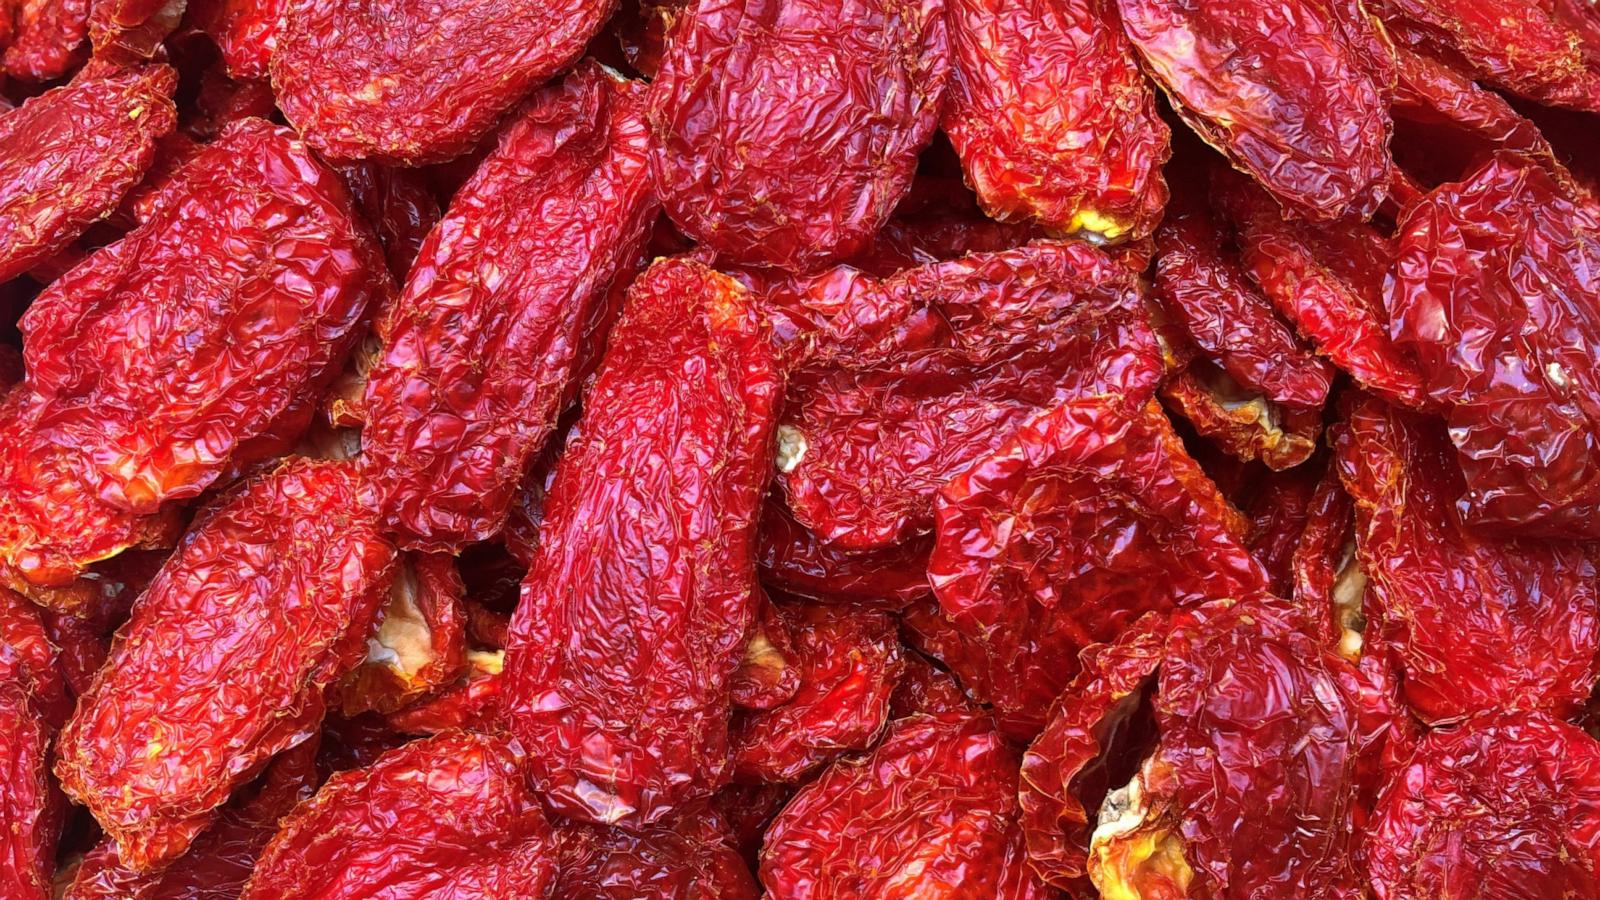 Sun-dried tomatoes recalled over 'undeclared sulfites' - ABC News